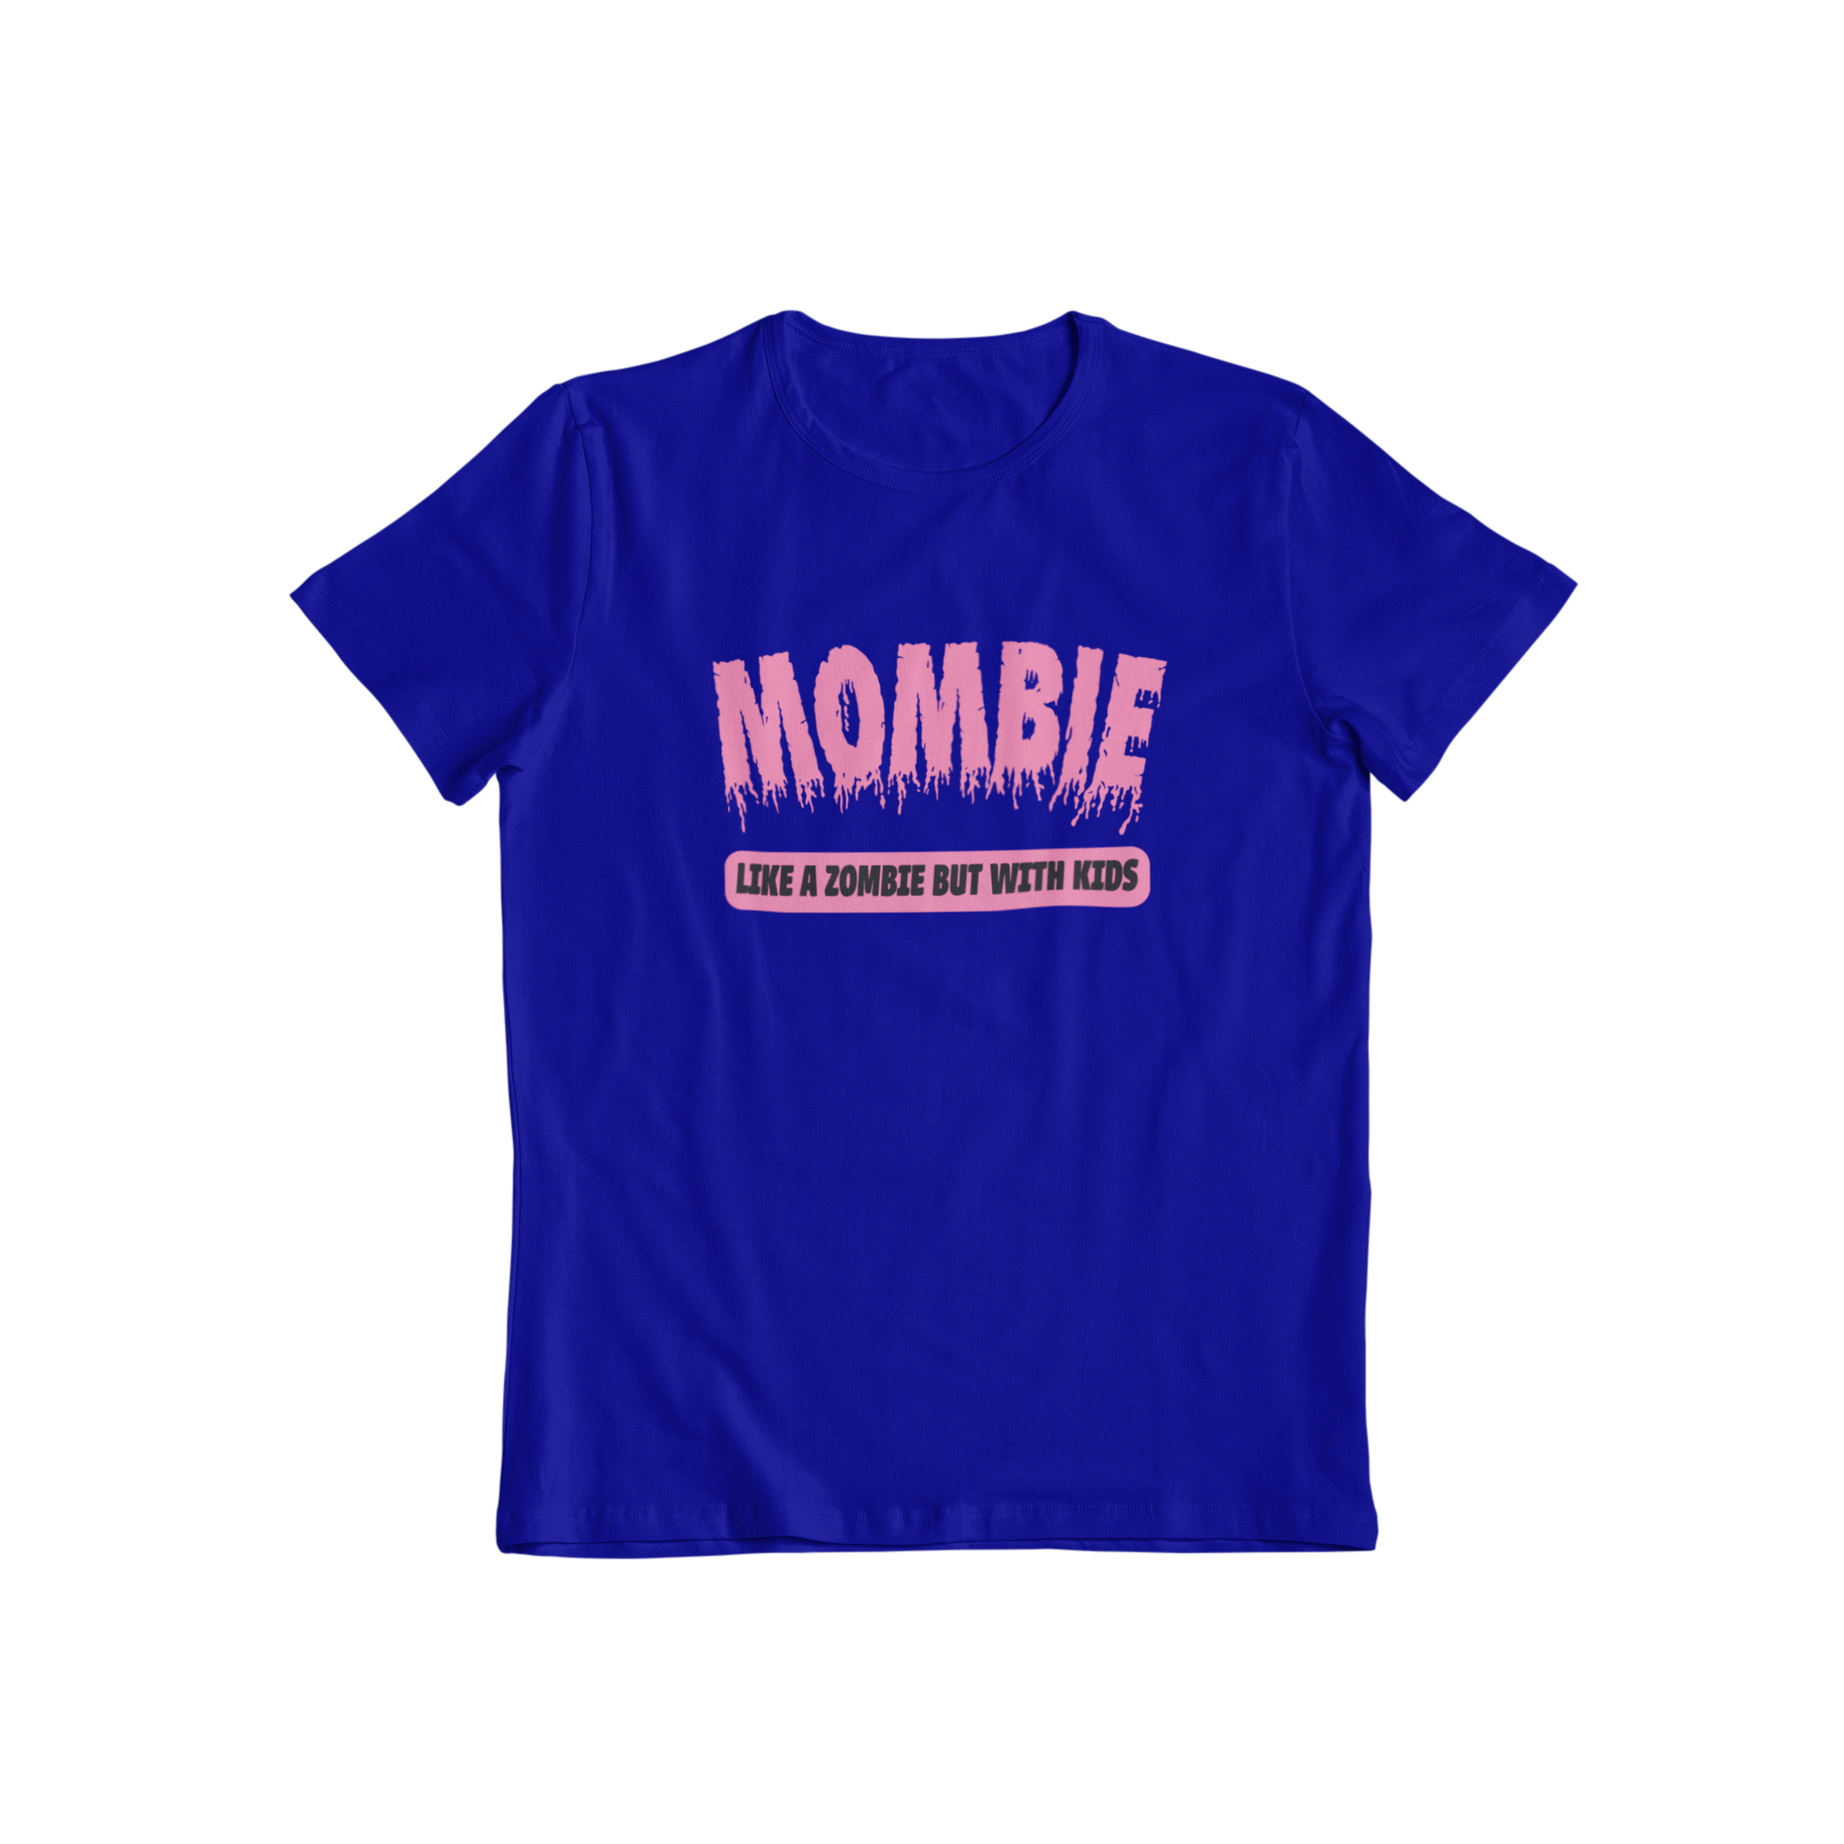 Embrace your inner mombie with this classic slogan t-shirt. Perfect for moms who feel like zombies with their kids, but in a good way. Show off your sense of humor and love for your little ones with this quirky tee.